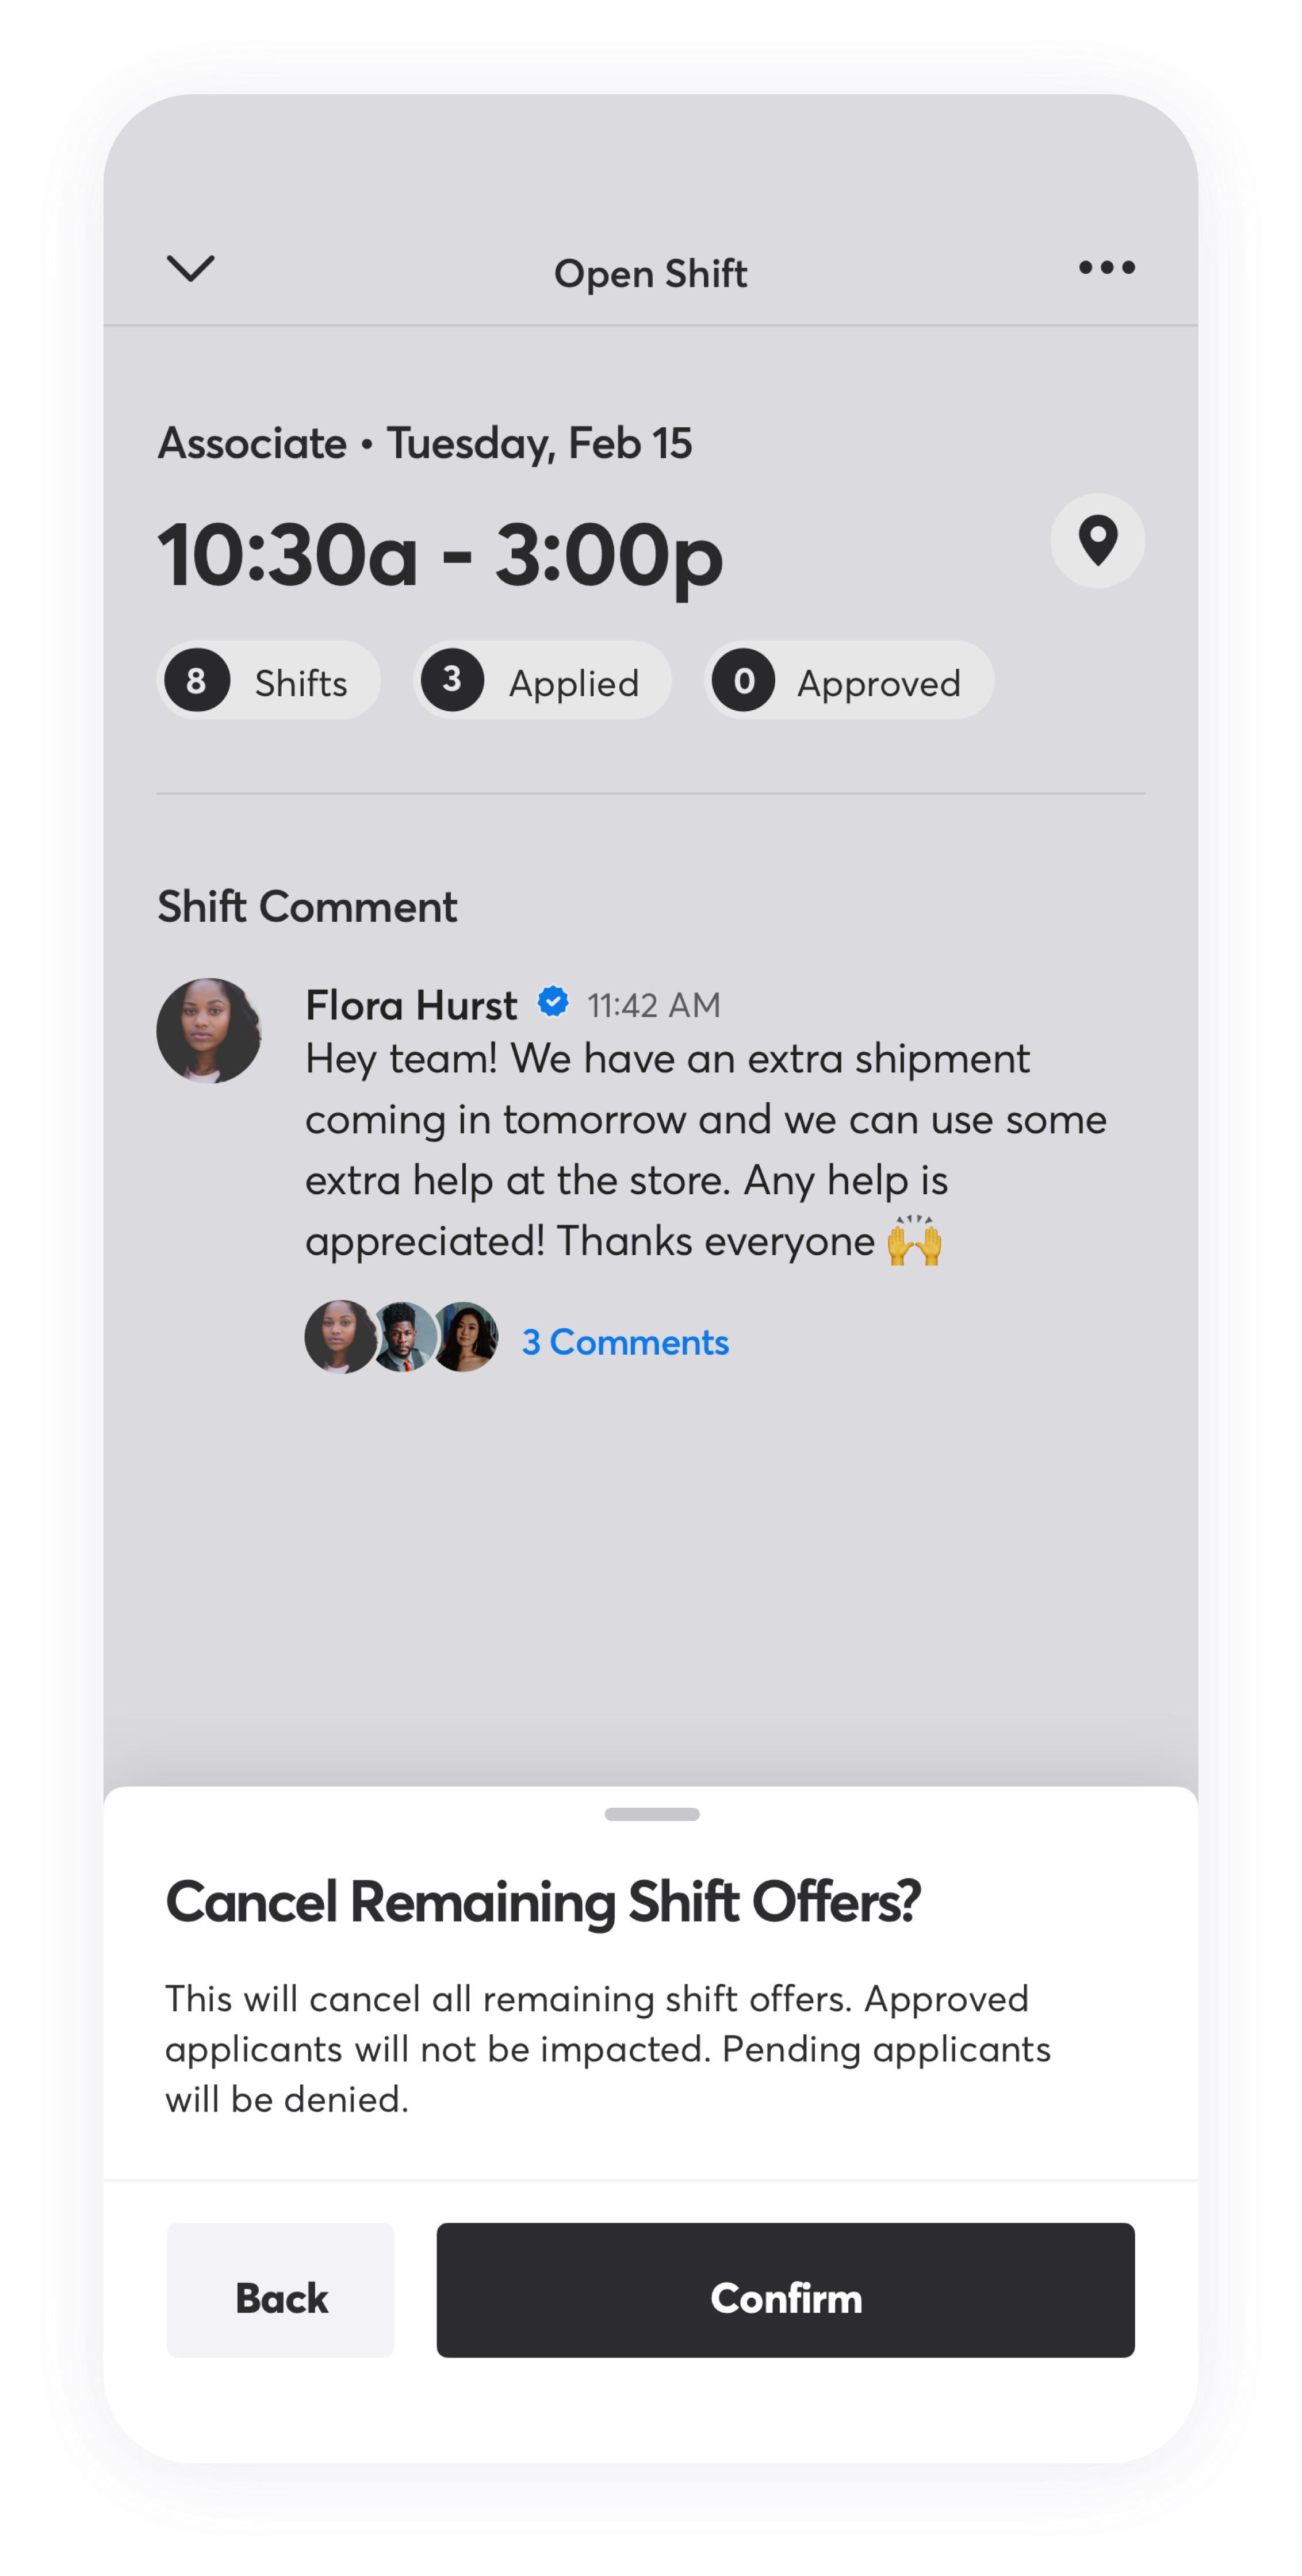 Cancel Remaining Shift Offers Confirm - Glow.png